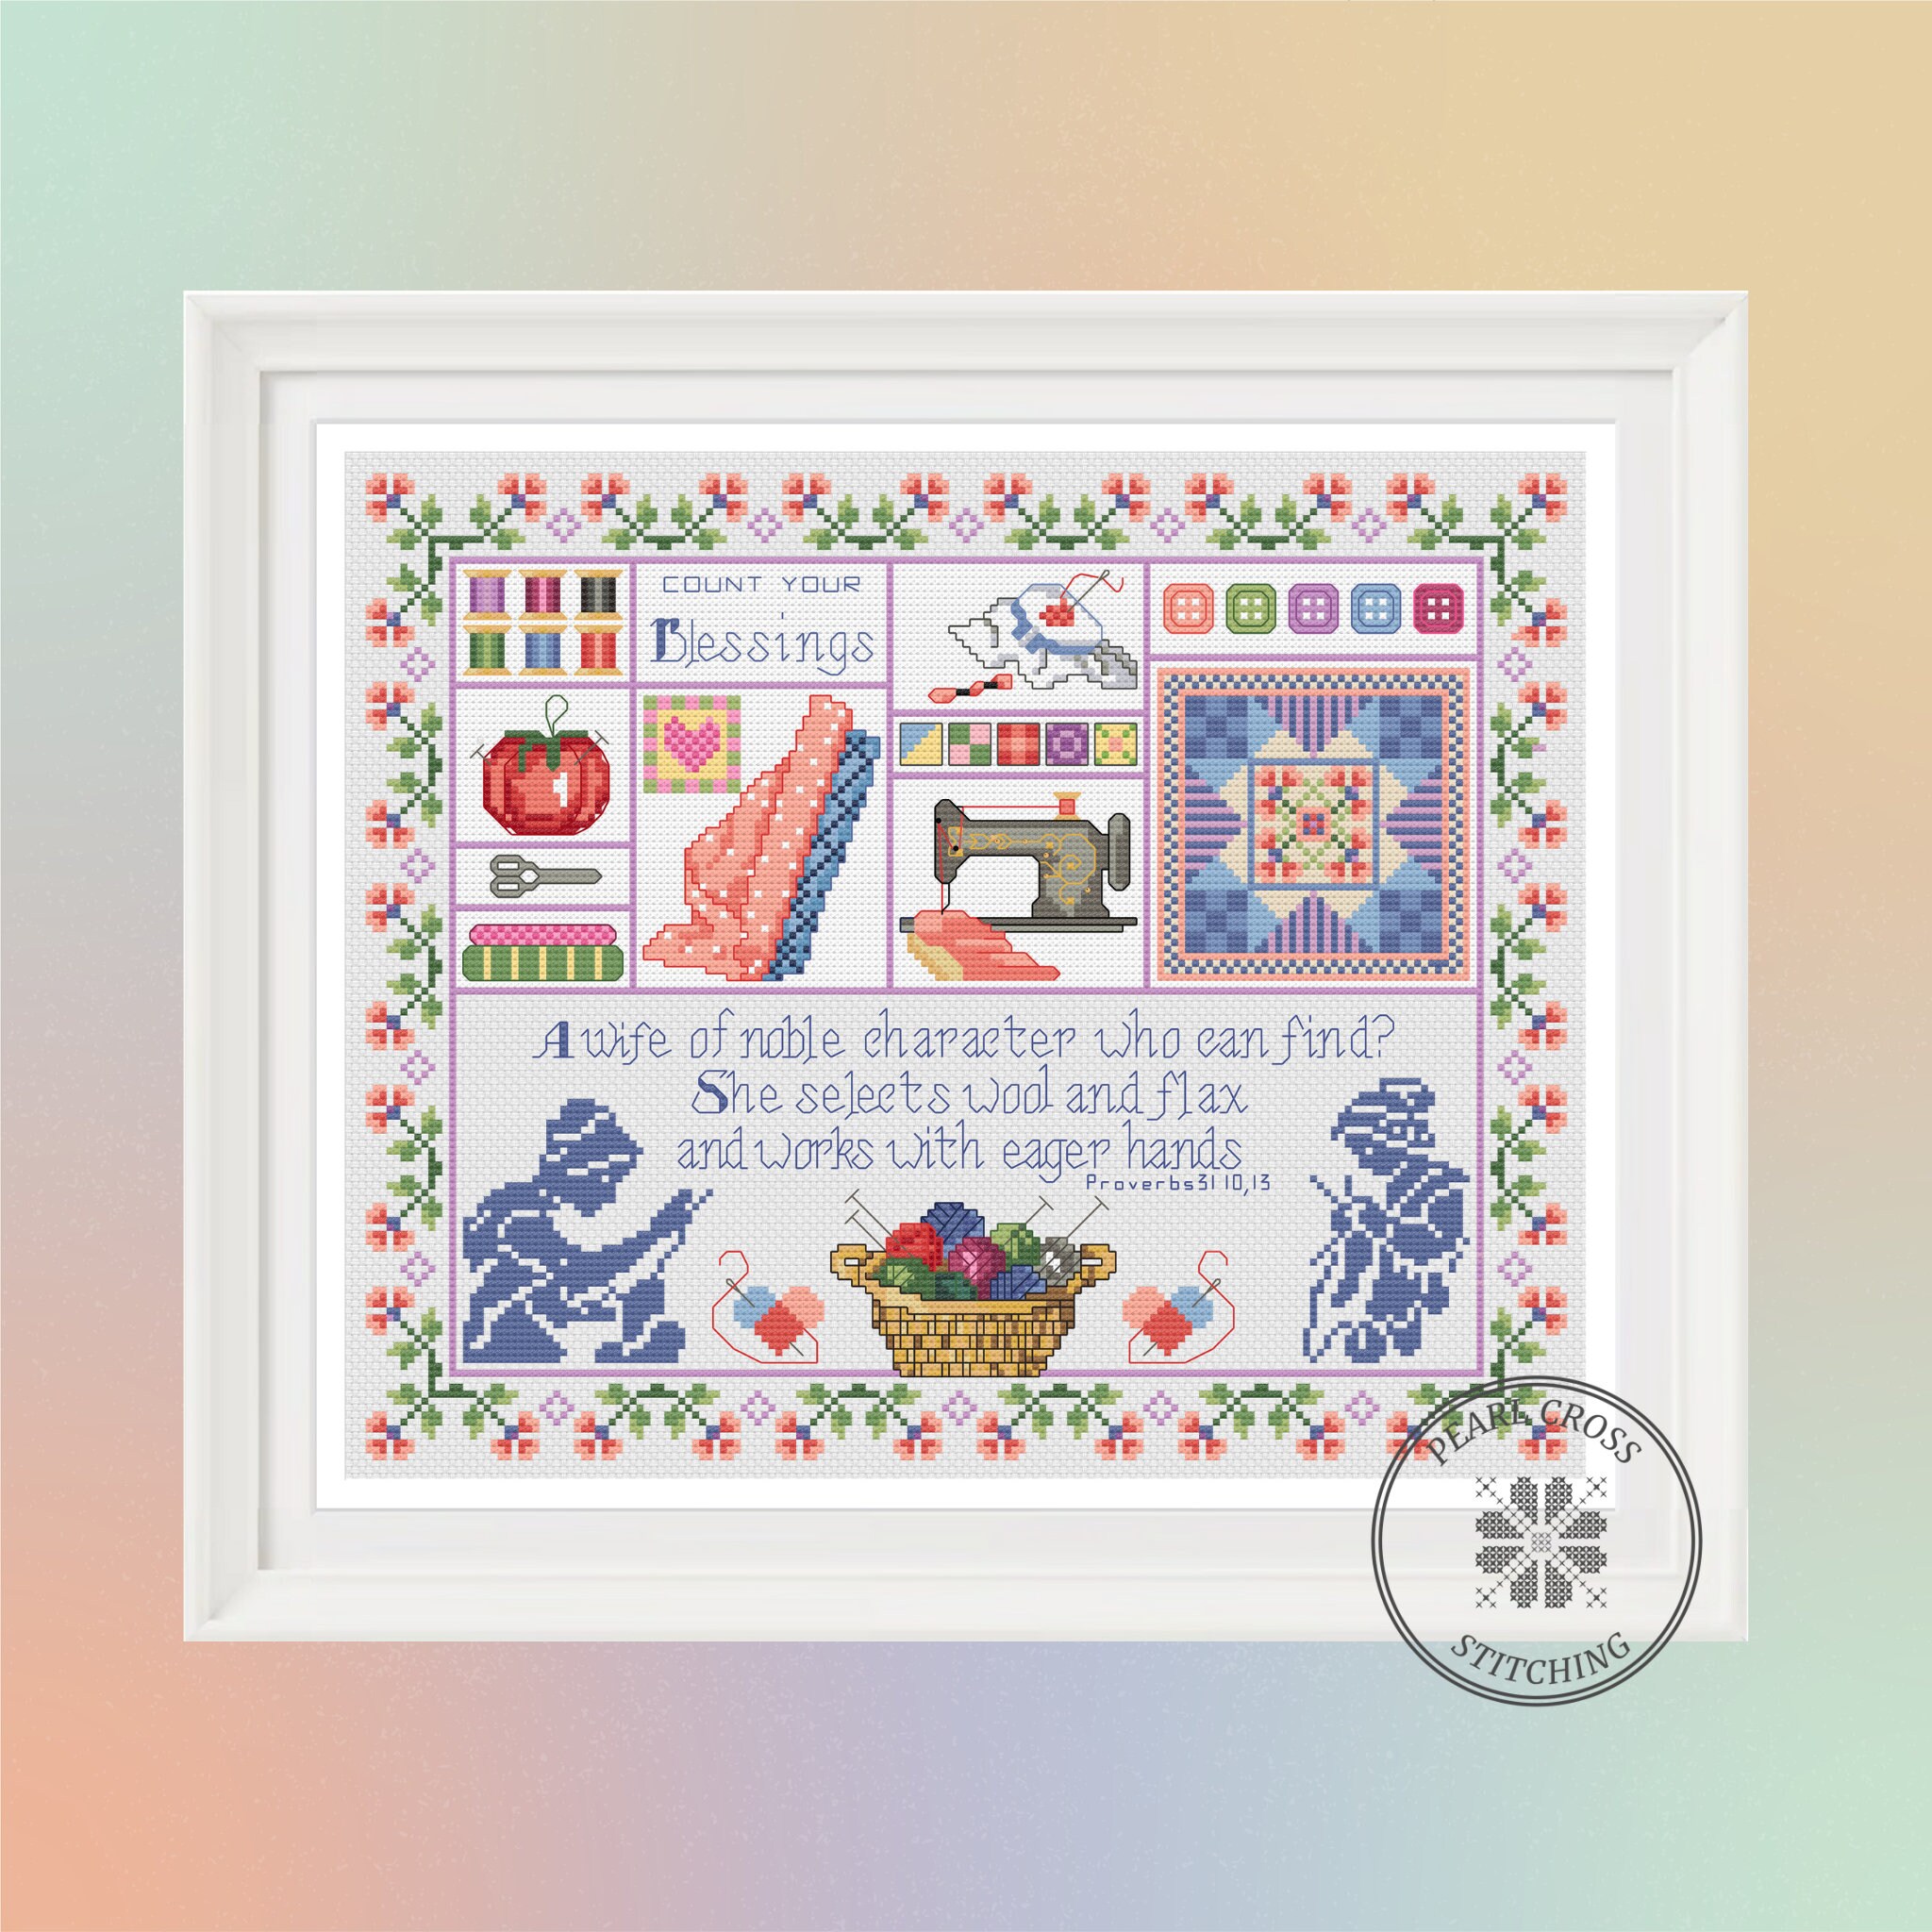 Nobility Counted Cross Stitch Patterns